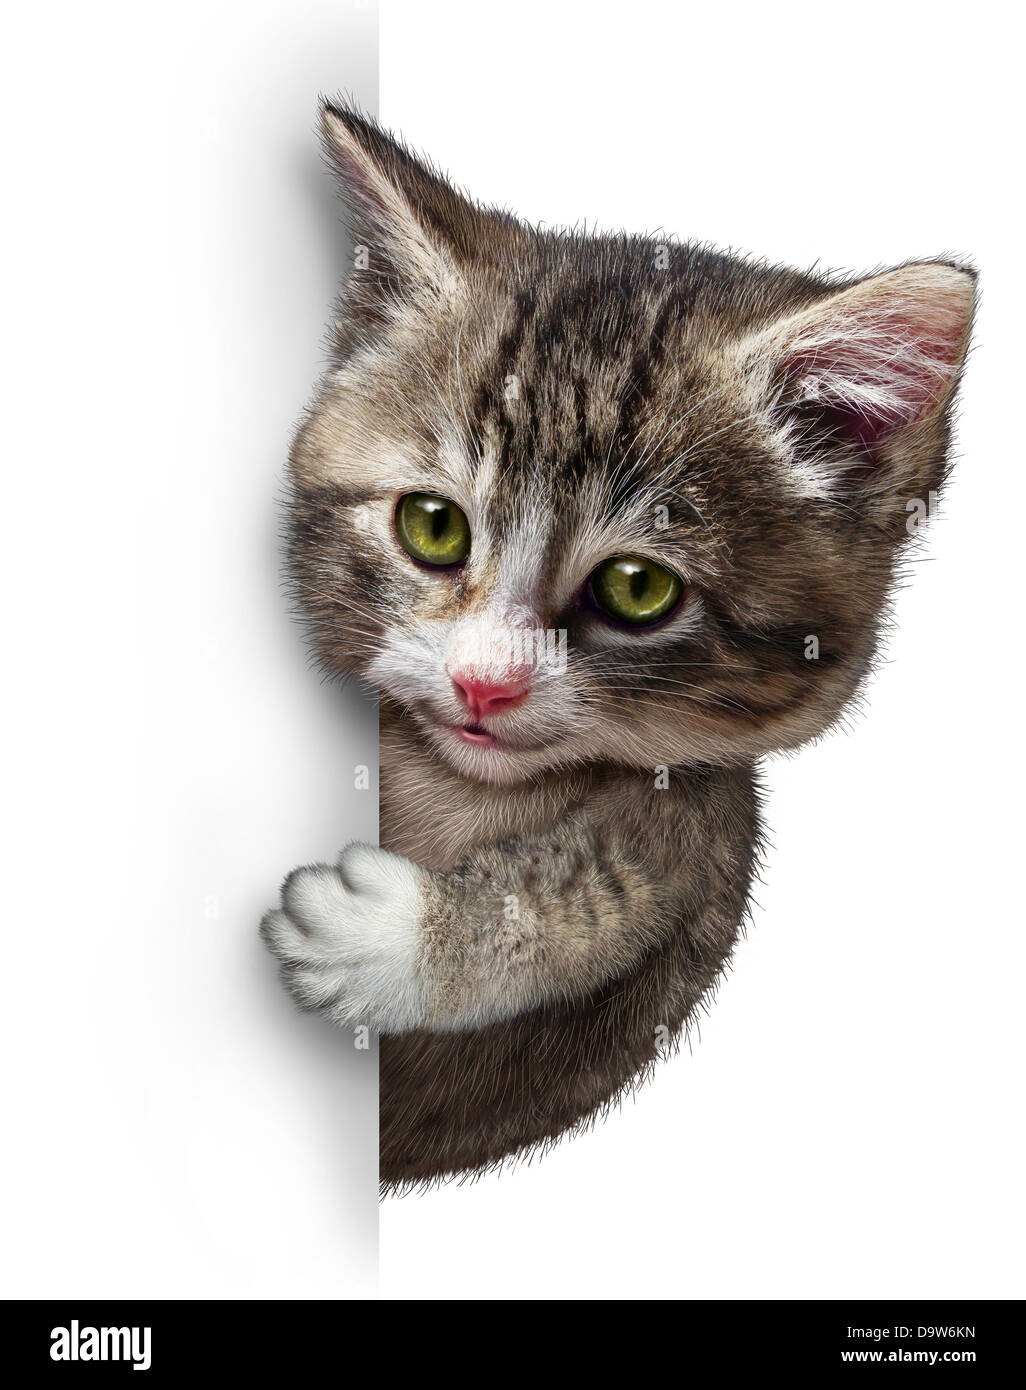 Cat or kitten with a blank vertical card sign as a cute feline with a smiling happy expression supporting and communicating a message pertaining to pet health care and welfare. Stock Photo